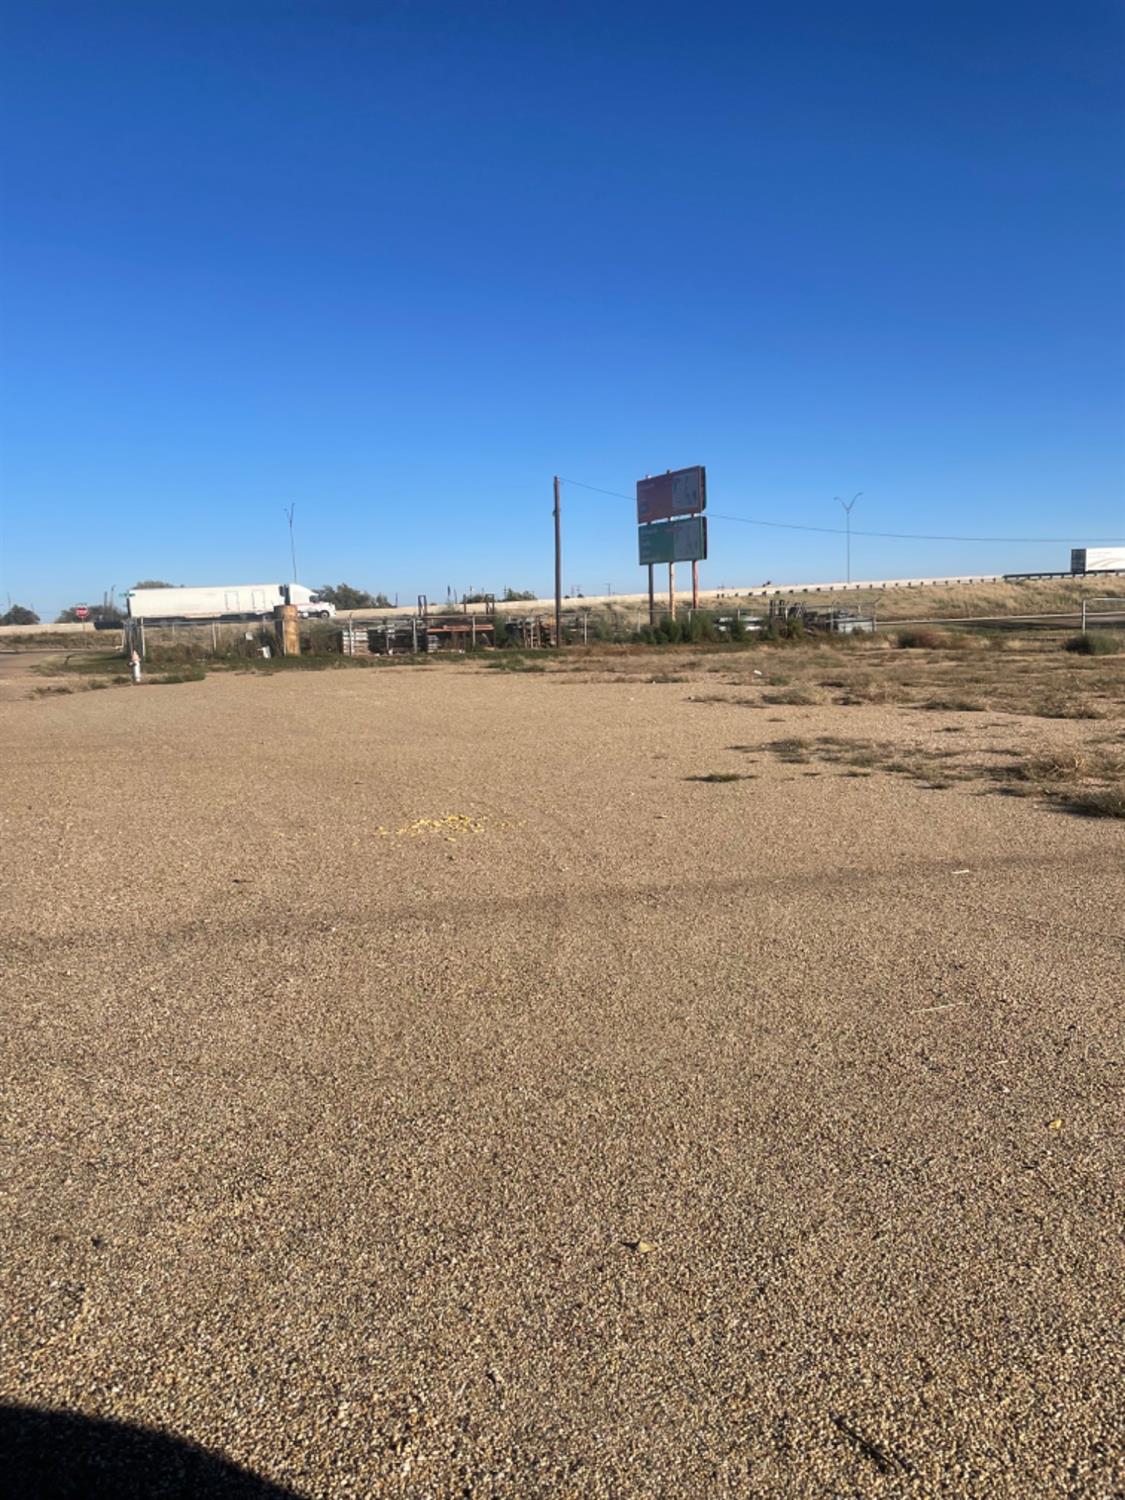 Commercial/Industrial lot with easy access to I-27 in desired Abernathy, TX, 17 miles north of Lubbock and minutes from Preston Smith International Airport.